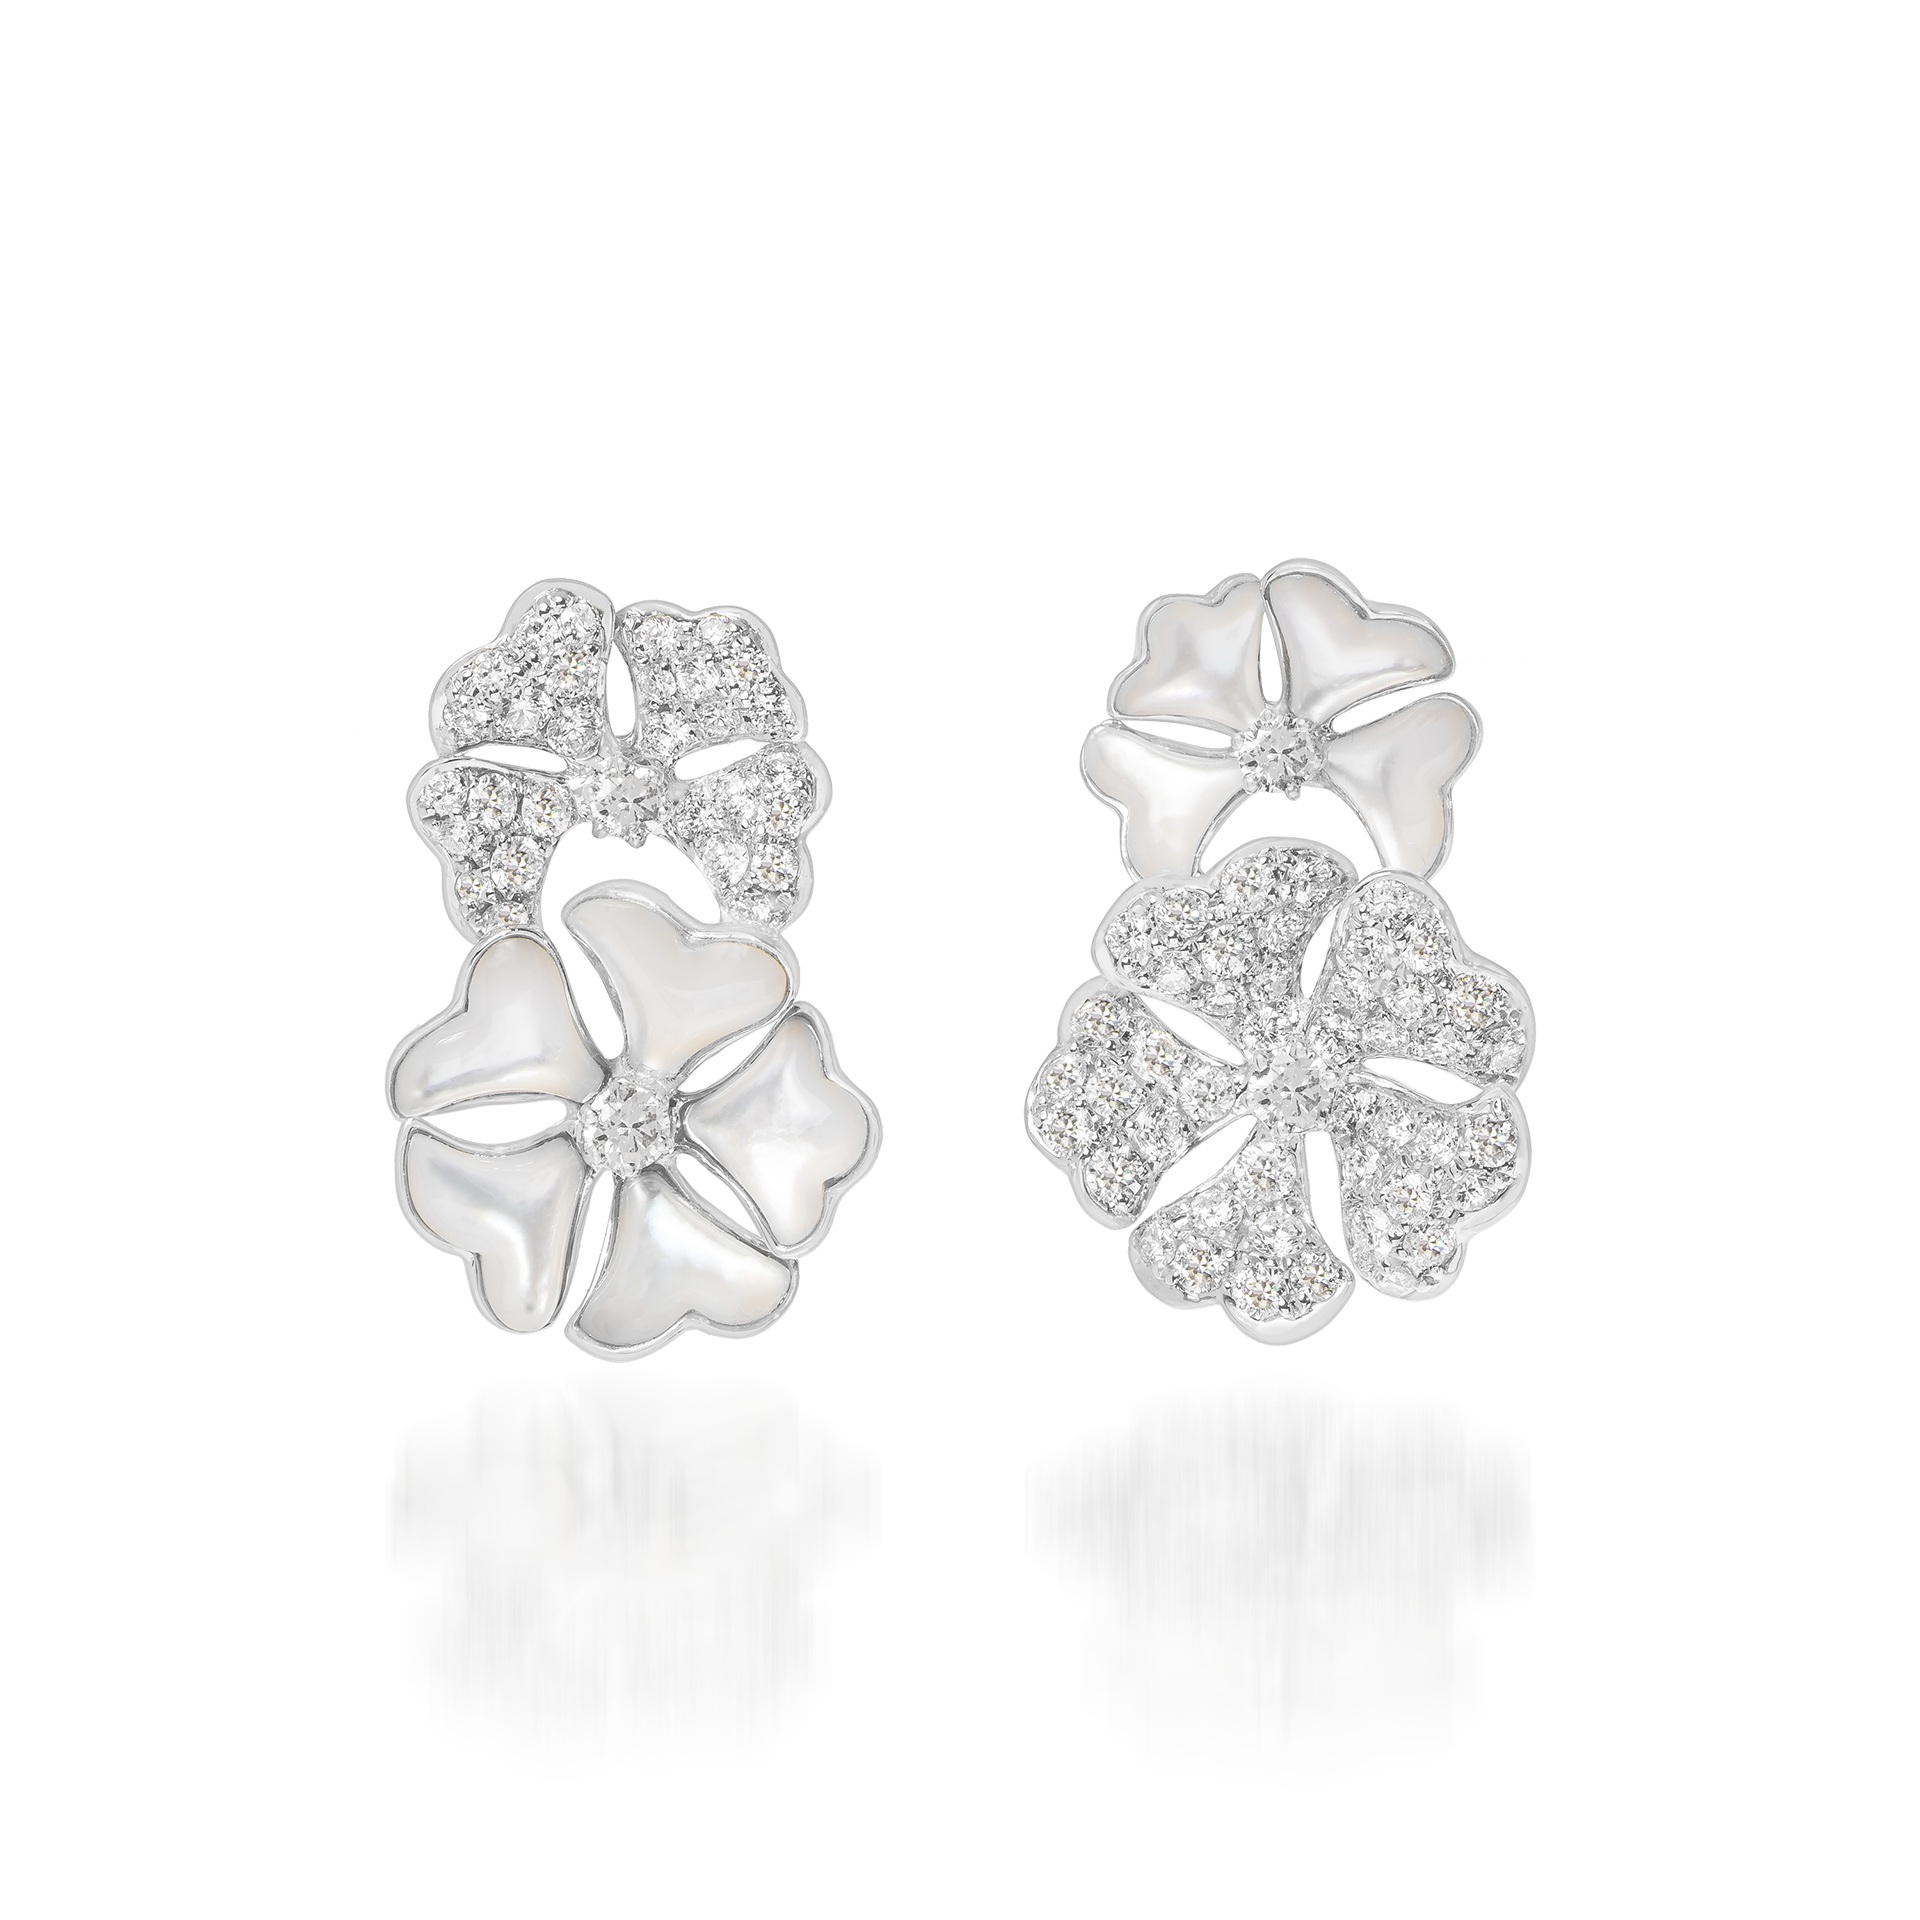 Bloom Diamond and White Mother-of-Pearl Double Bloom Earrings In 18K White Gold